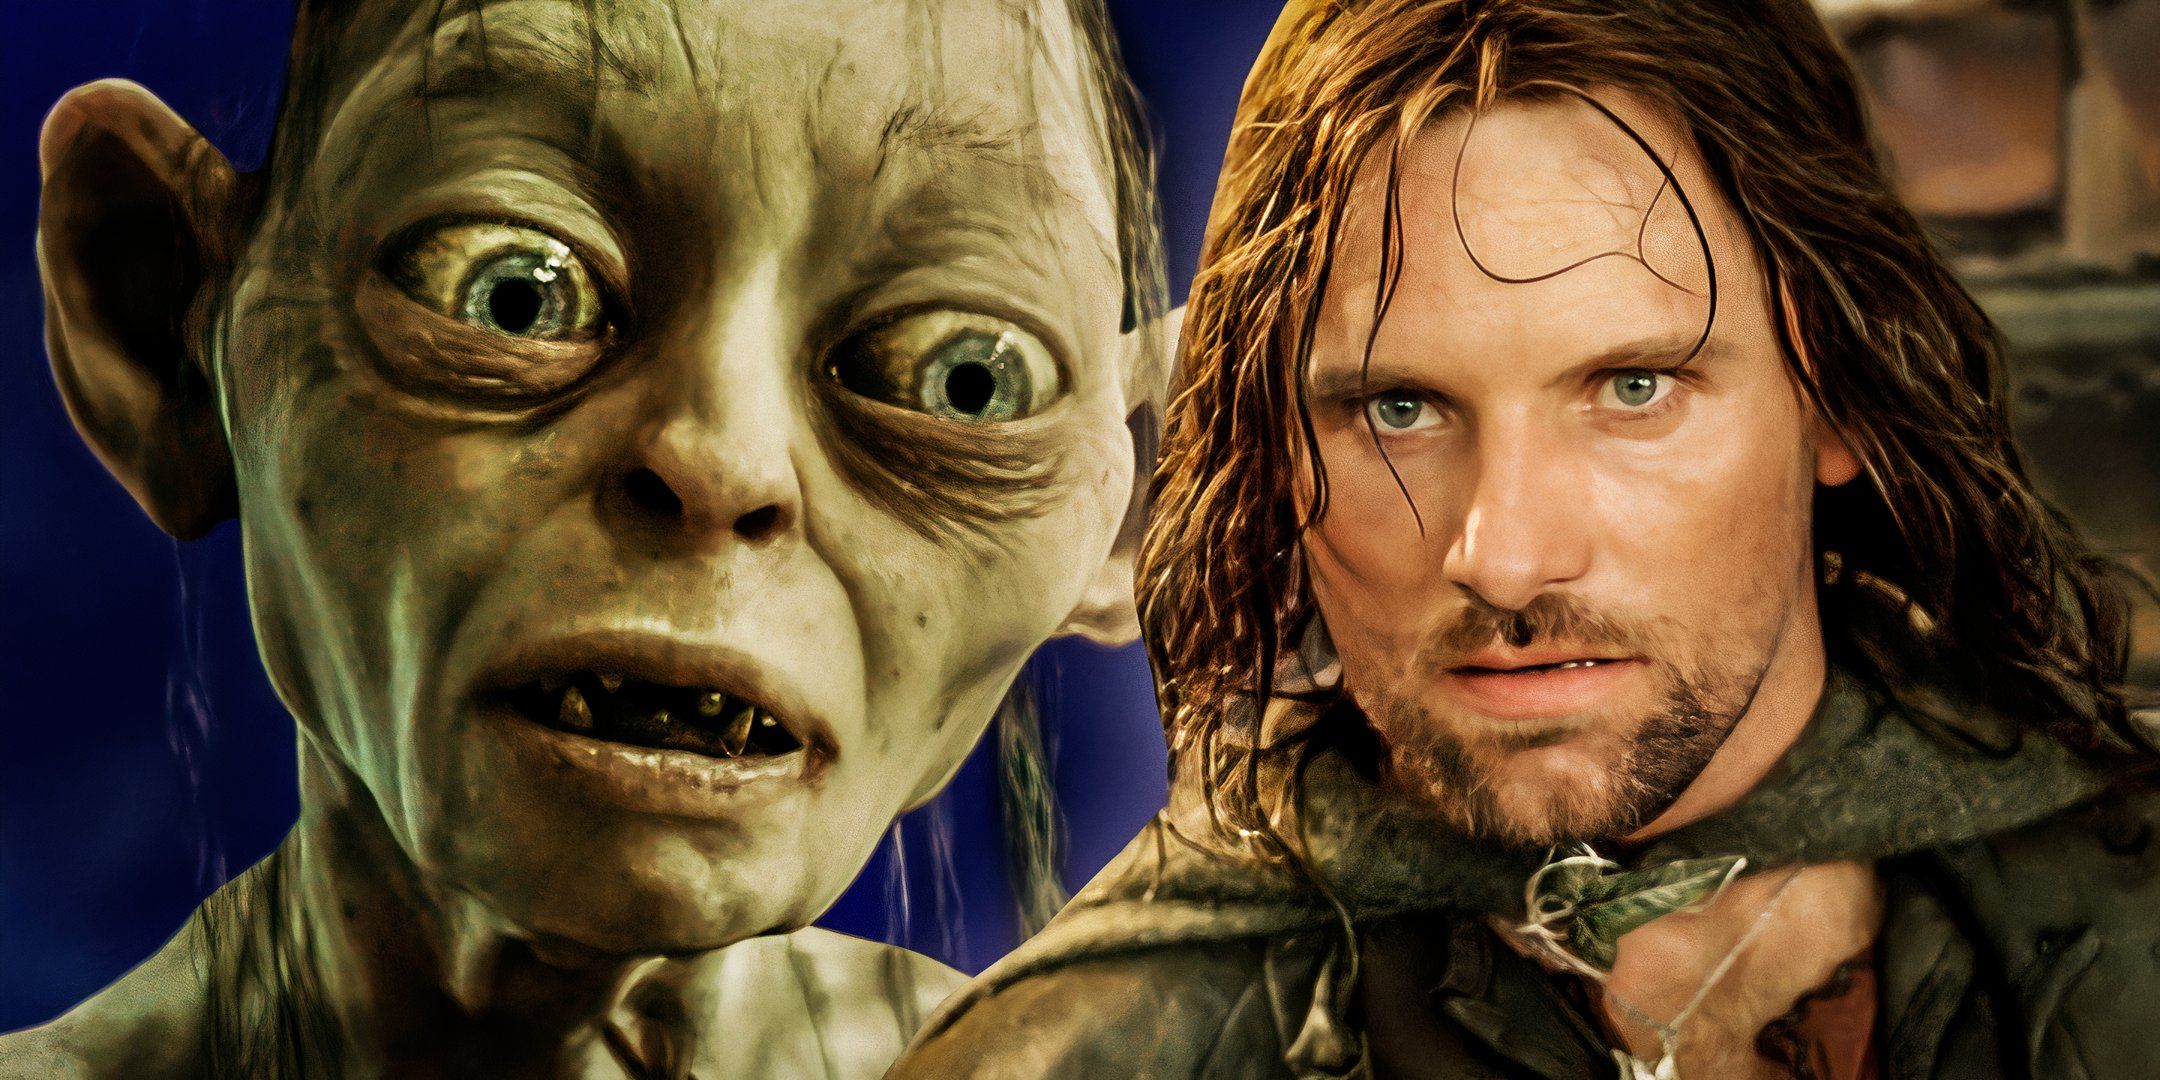 Aragorn and Gollum from The Lord of the Rings